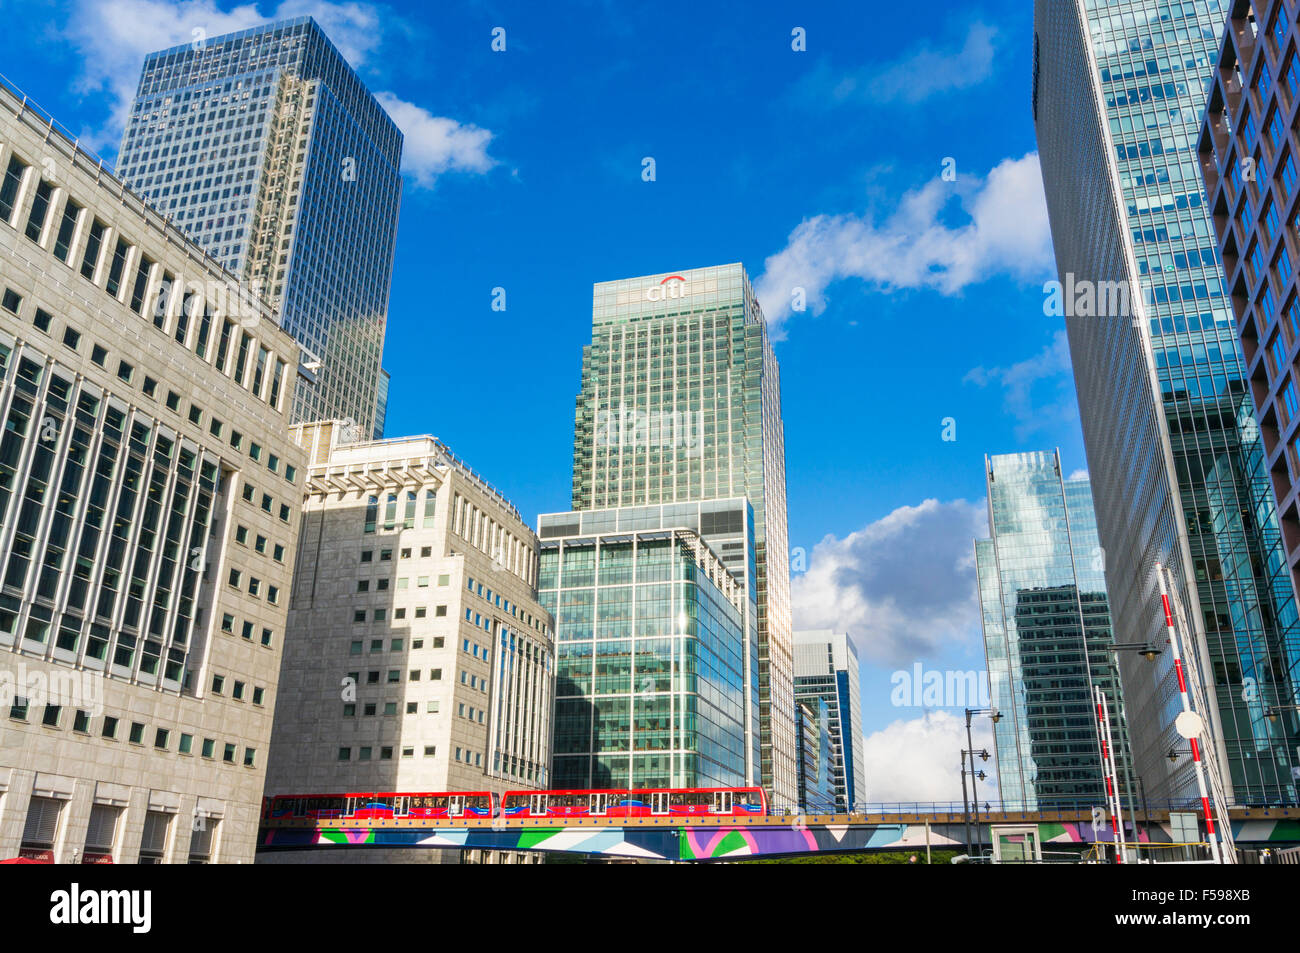 Canary wharf skyscrapers CBD banking and financial district Docklands London England UK GB EU Europe Stock Photo